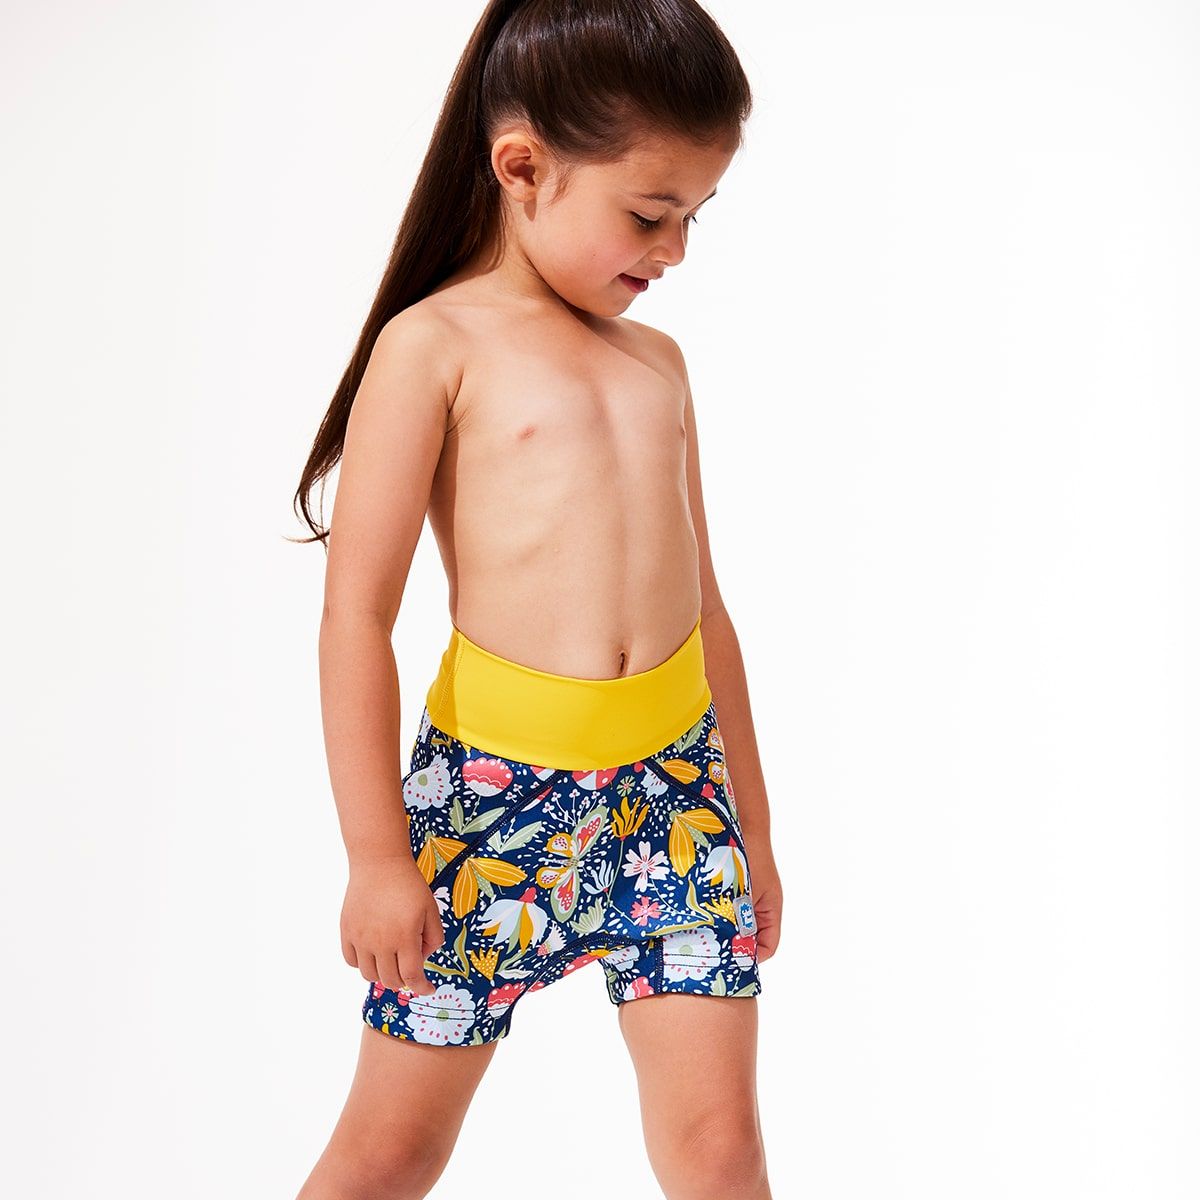 Lifestyle image of toddler wearing neoprene swim shorts in navy blue with yellow waist and floral print.